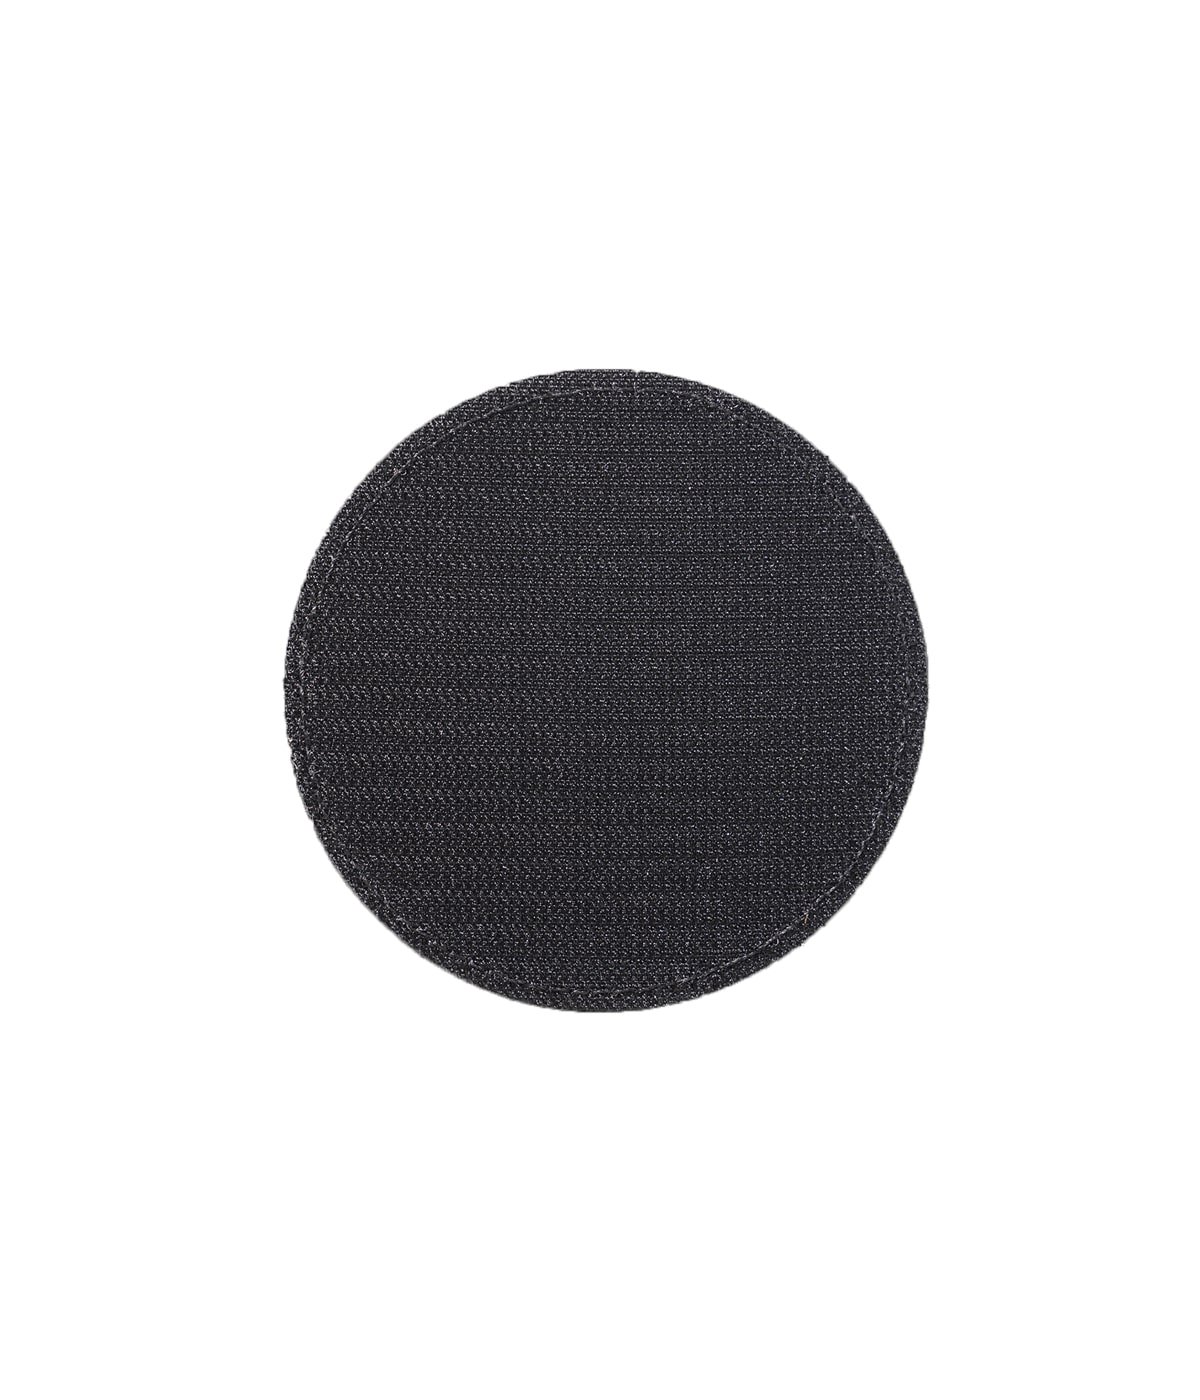 ICON LEATHER PATCH (MARK)